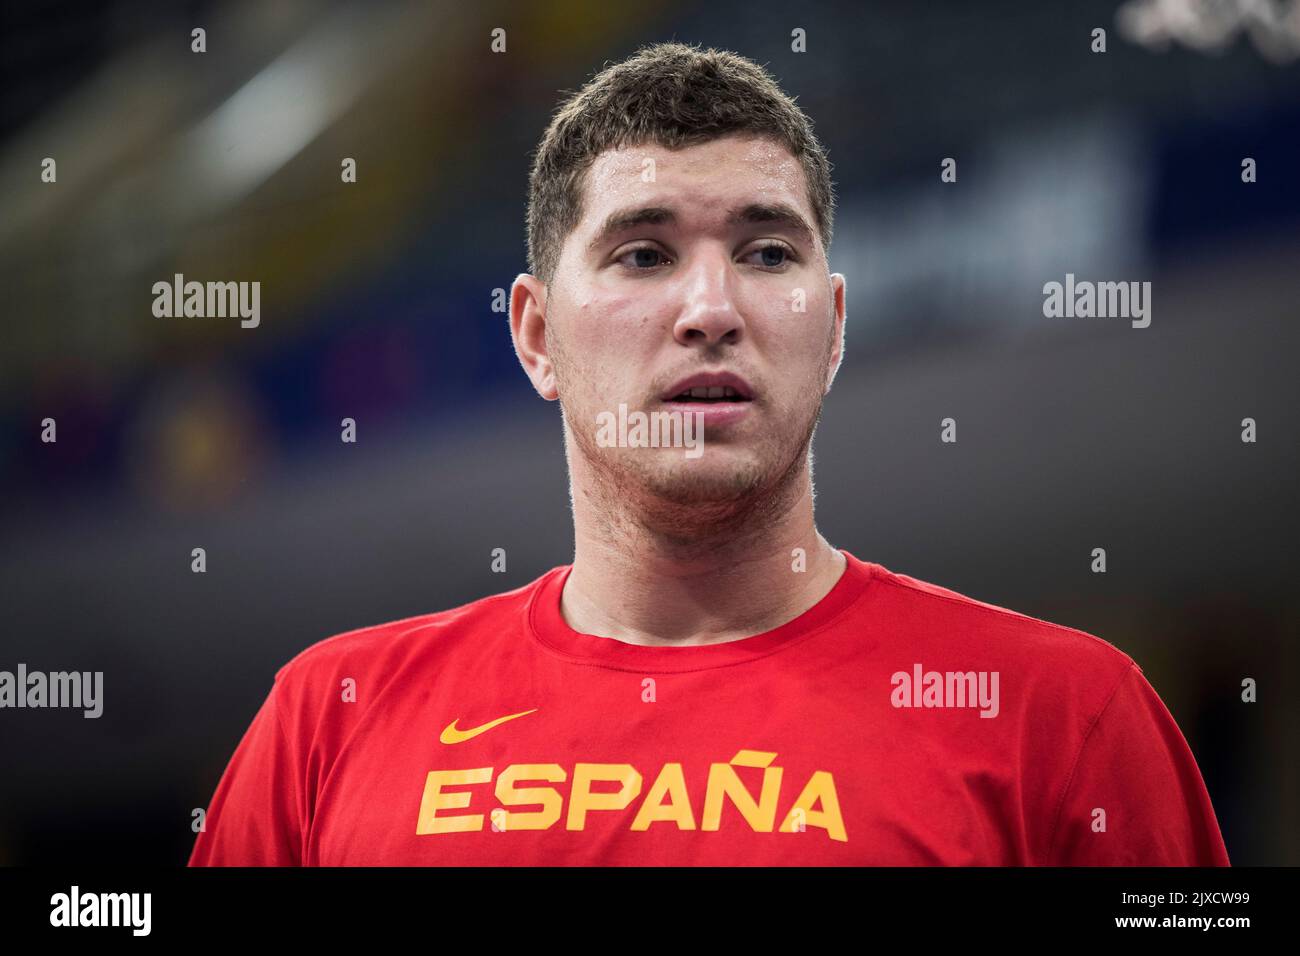 Tbilisi, Georgia, 6th September 2022. Joel Parra of Spain looks on during the FIBA EuroBasket 2022 group A match between Montenegro and Spain at Tbilisi Arena in Tbilisi, Georgia. September 6, 2022. Credit: Nikola Krstic/Alamy Stock Photo